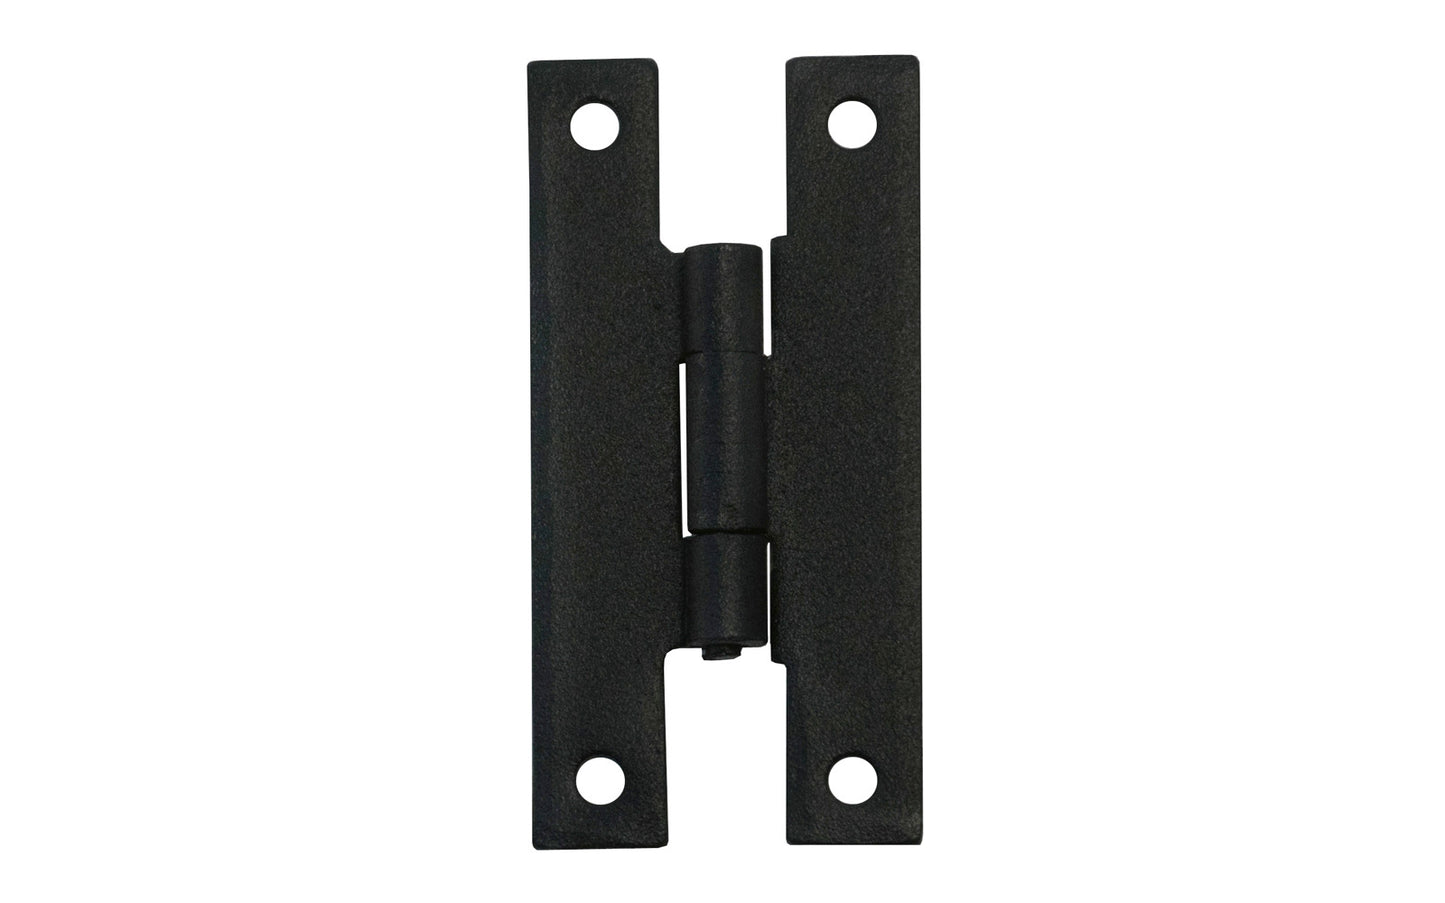 3" Forged Steel H Hinges with a vintage-style looking black powder coated finish. Made of sturdy forged steel material. The H hinge can be used on cabinets & doors, etc. Sold in as a pair - Two total hinges. Includes eight Phillips flat head screws. Model 88585.